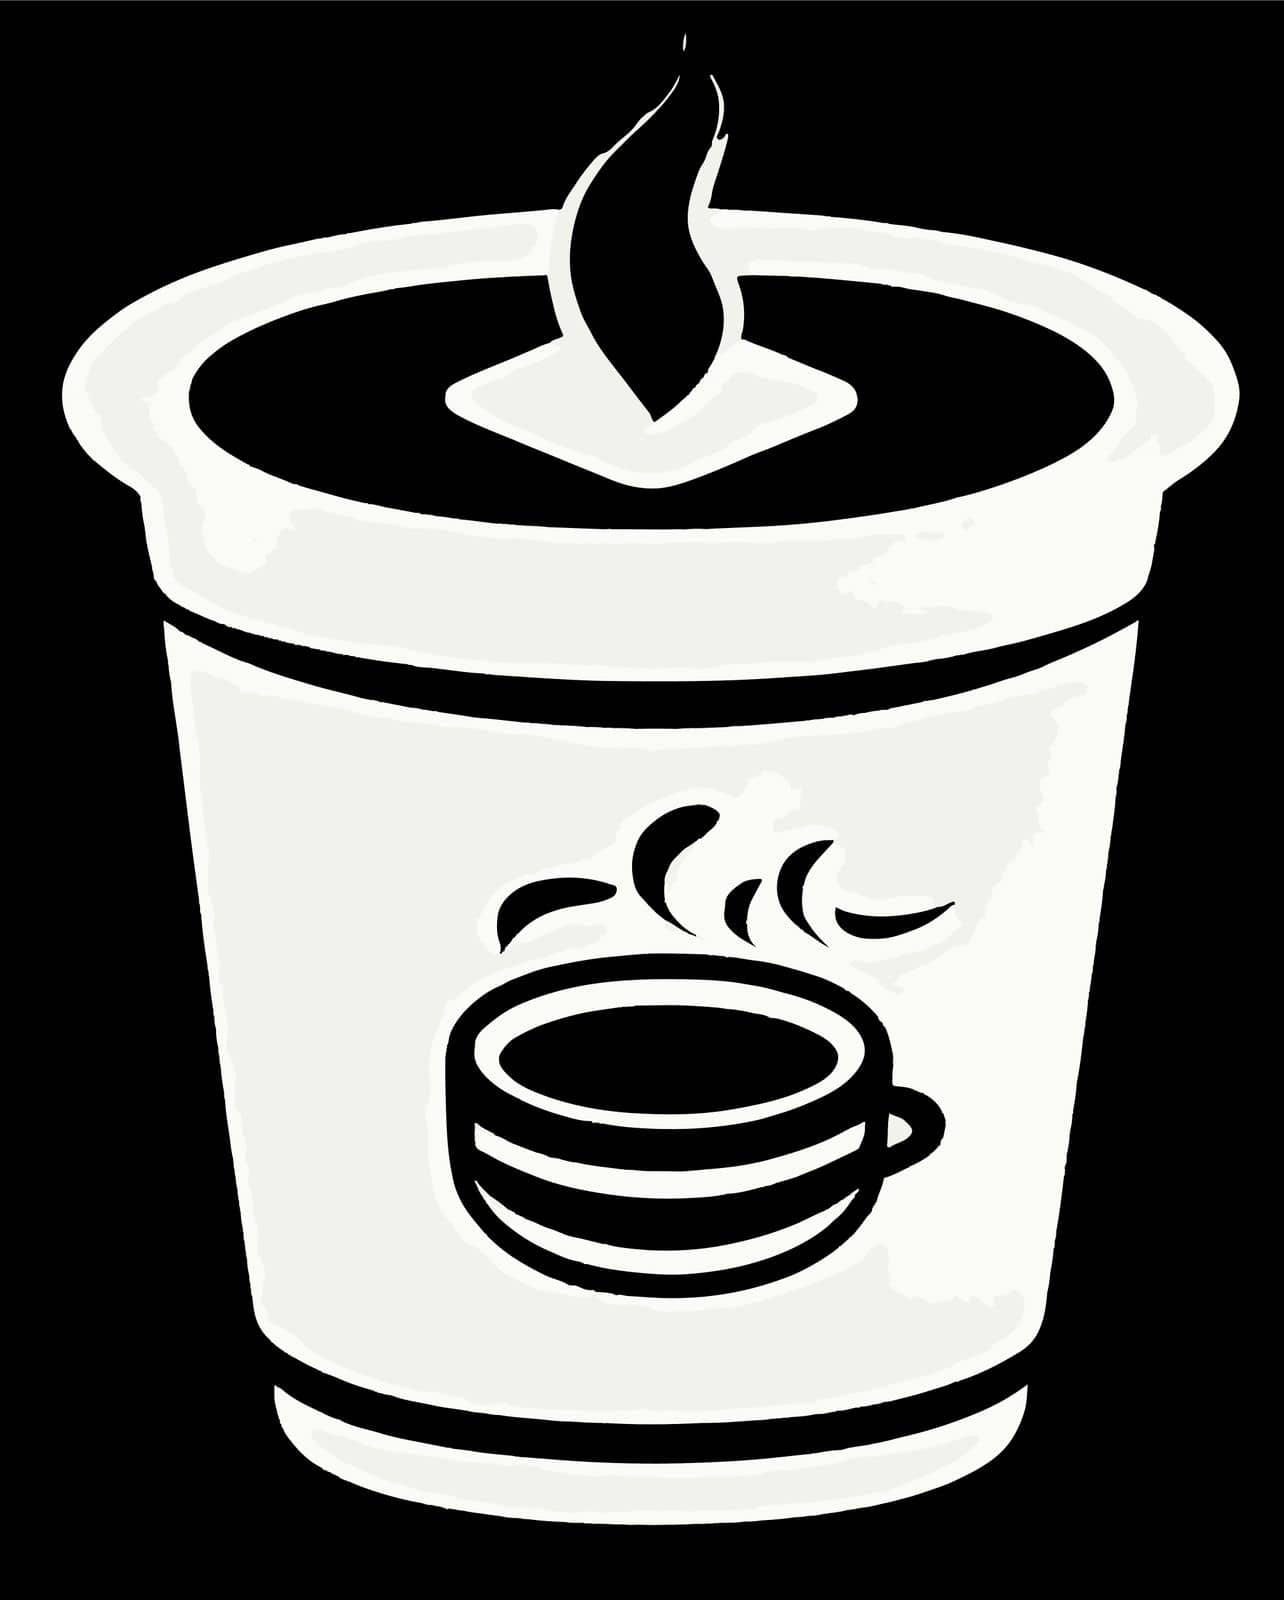 close-up ready to drink hot coffee. vector illustration.